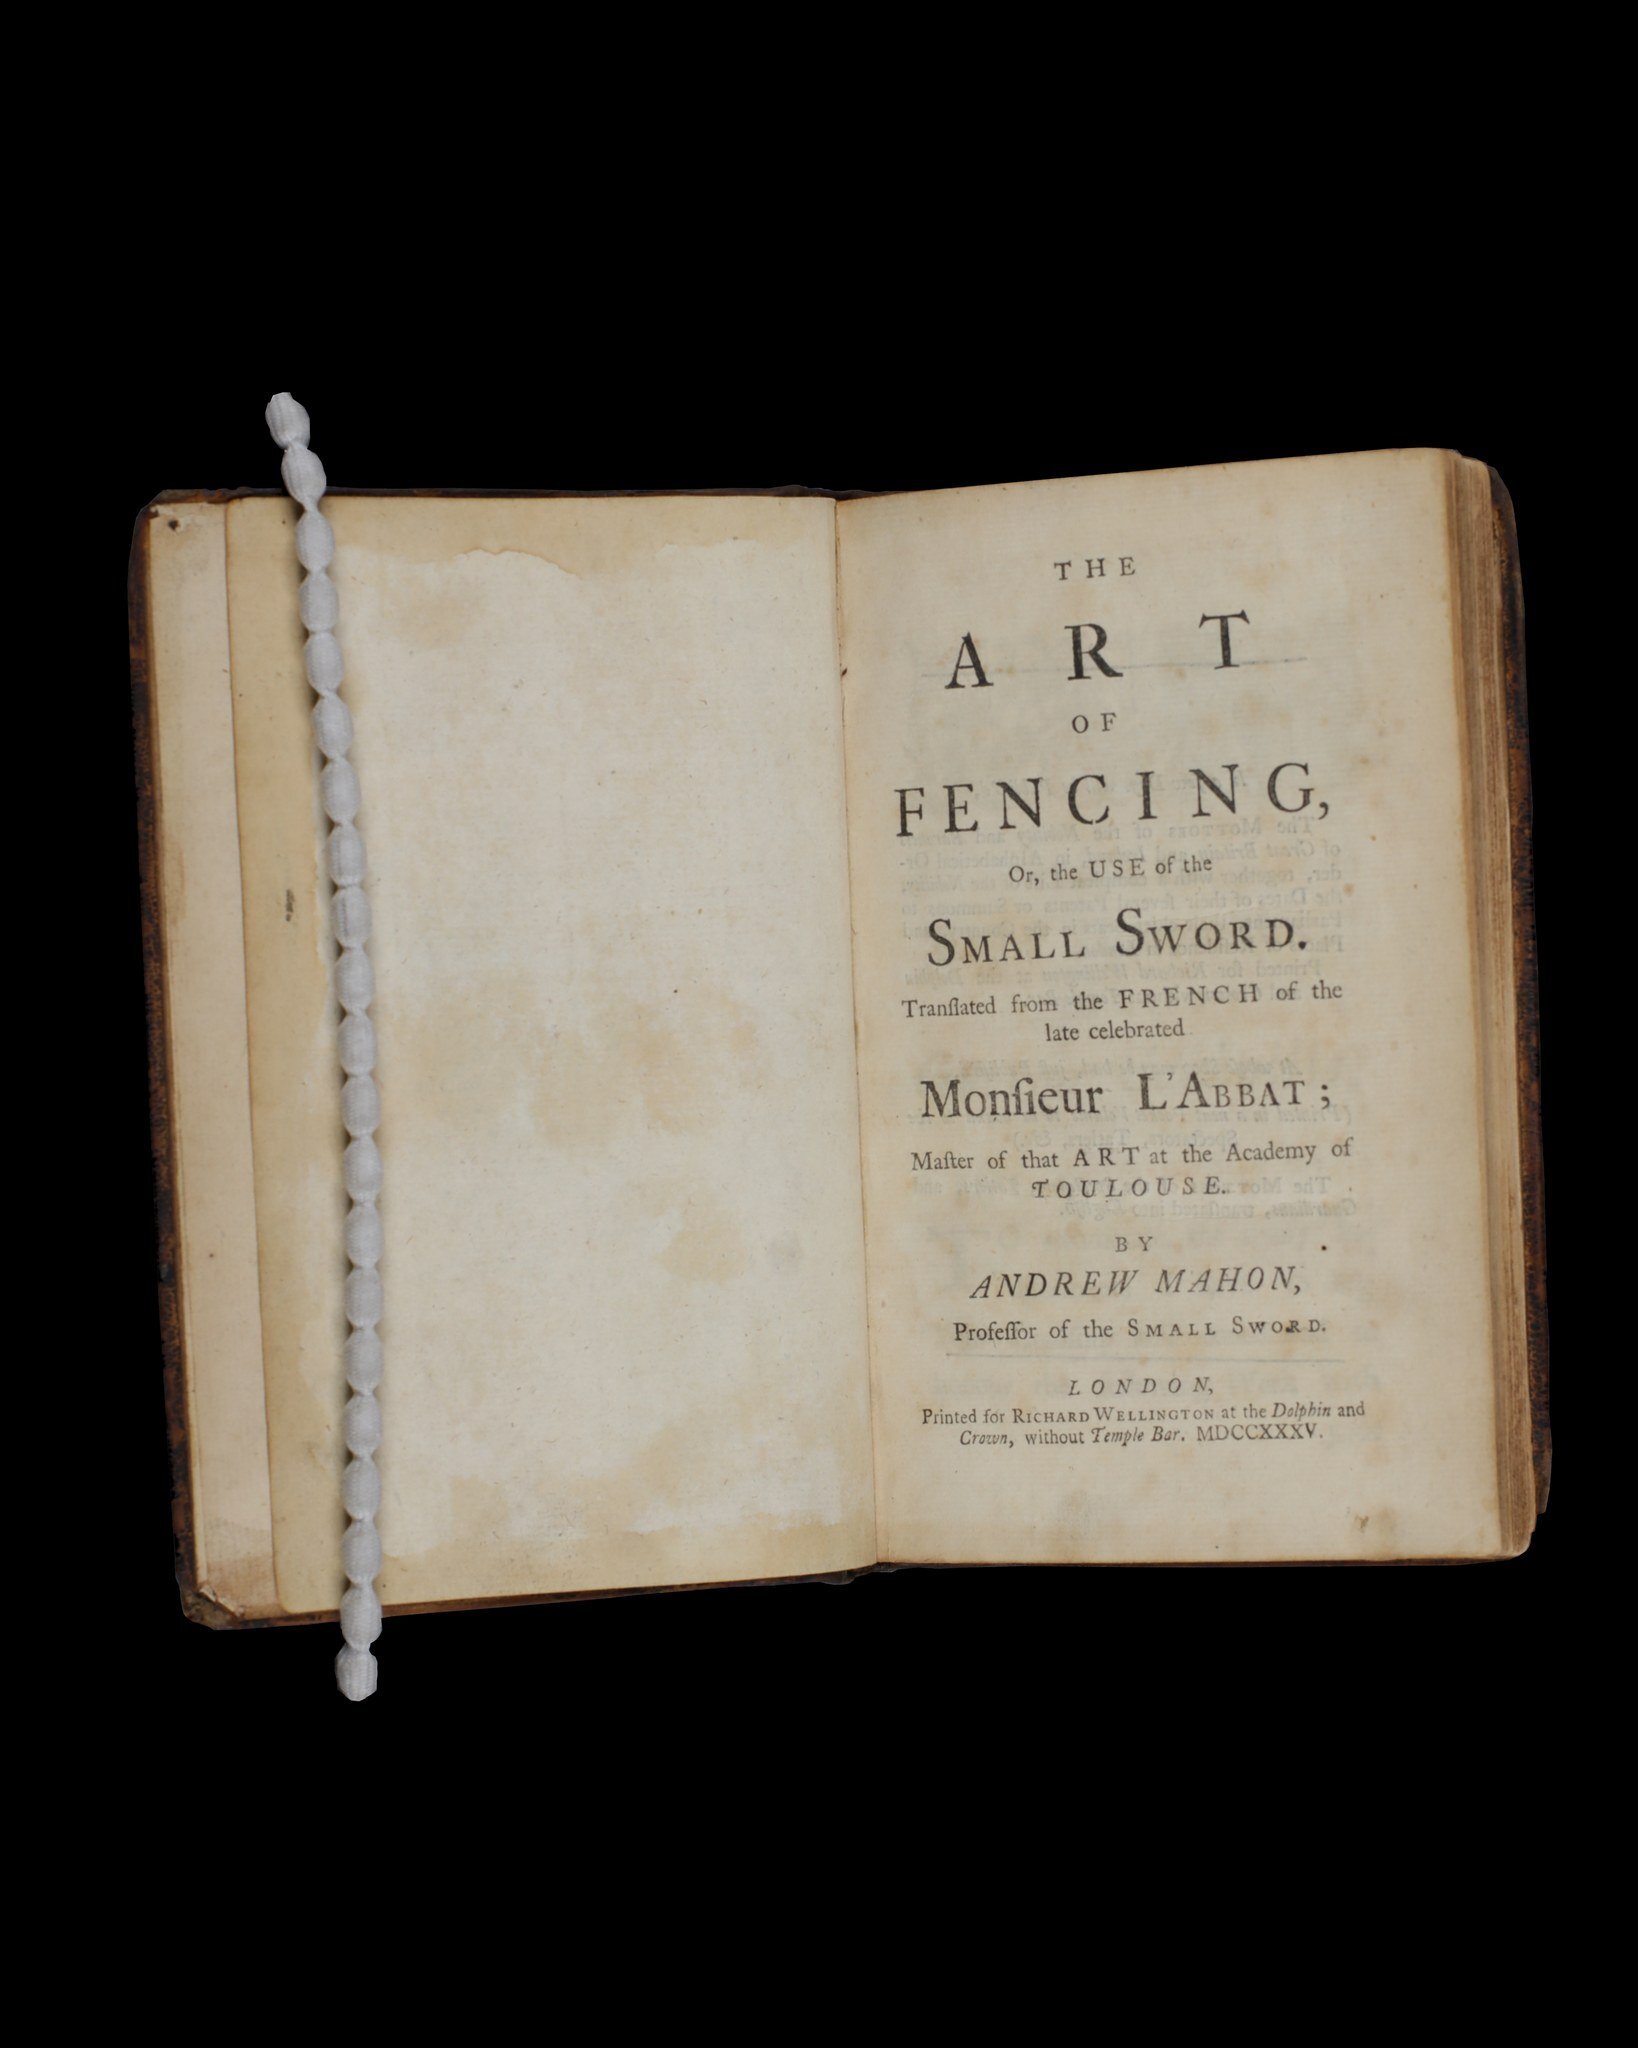 L&rsquo;abbat &ndash; The Art of Fencing or the use of the small sword

A copy of L&rsquo;abbat&rsquo;s book on small sword translated into English by Andrew Mahon and published in 1735. A reissue of the 1734 Dublin edition, it was printed by William